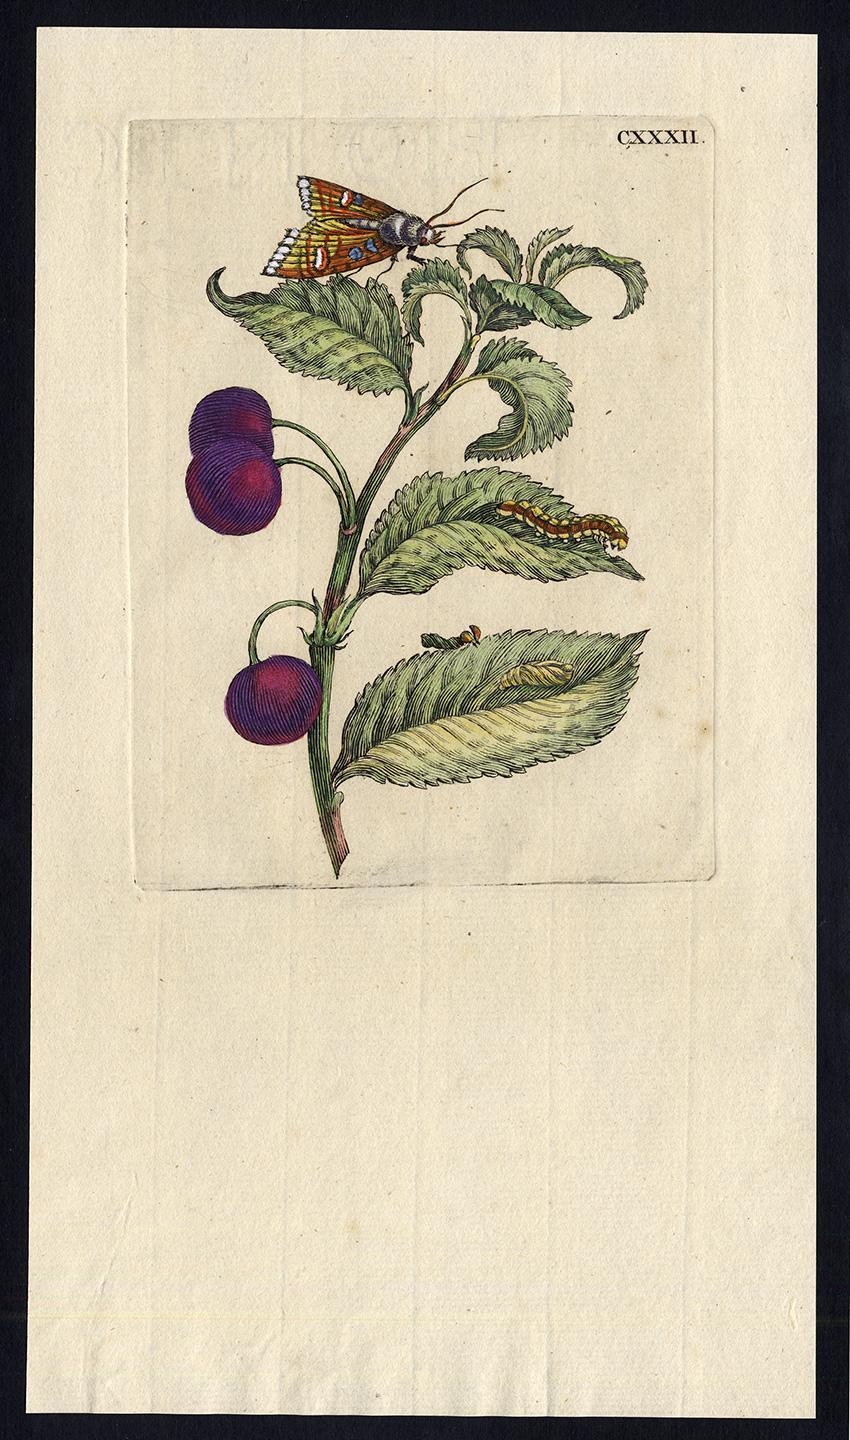 Maria Sybilla Merian Animal Print - Morello Cherry with insects by Merian - Handcoloured engraving - 18th century